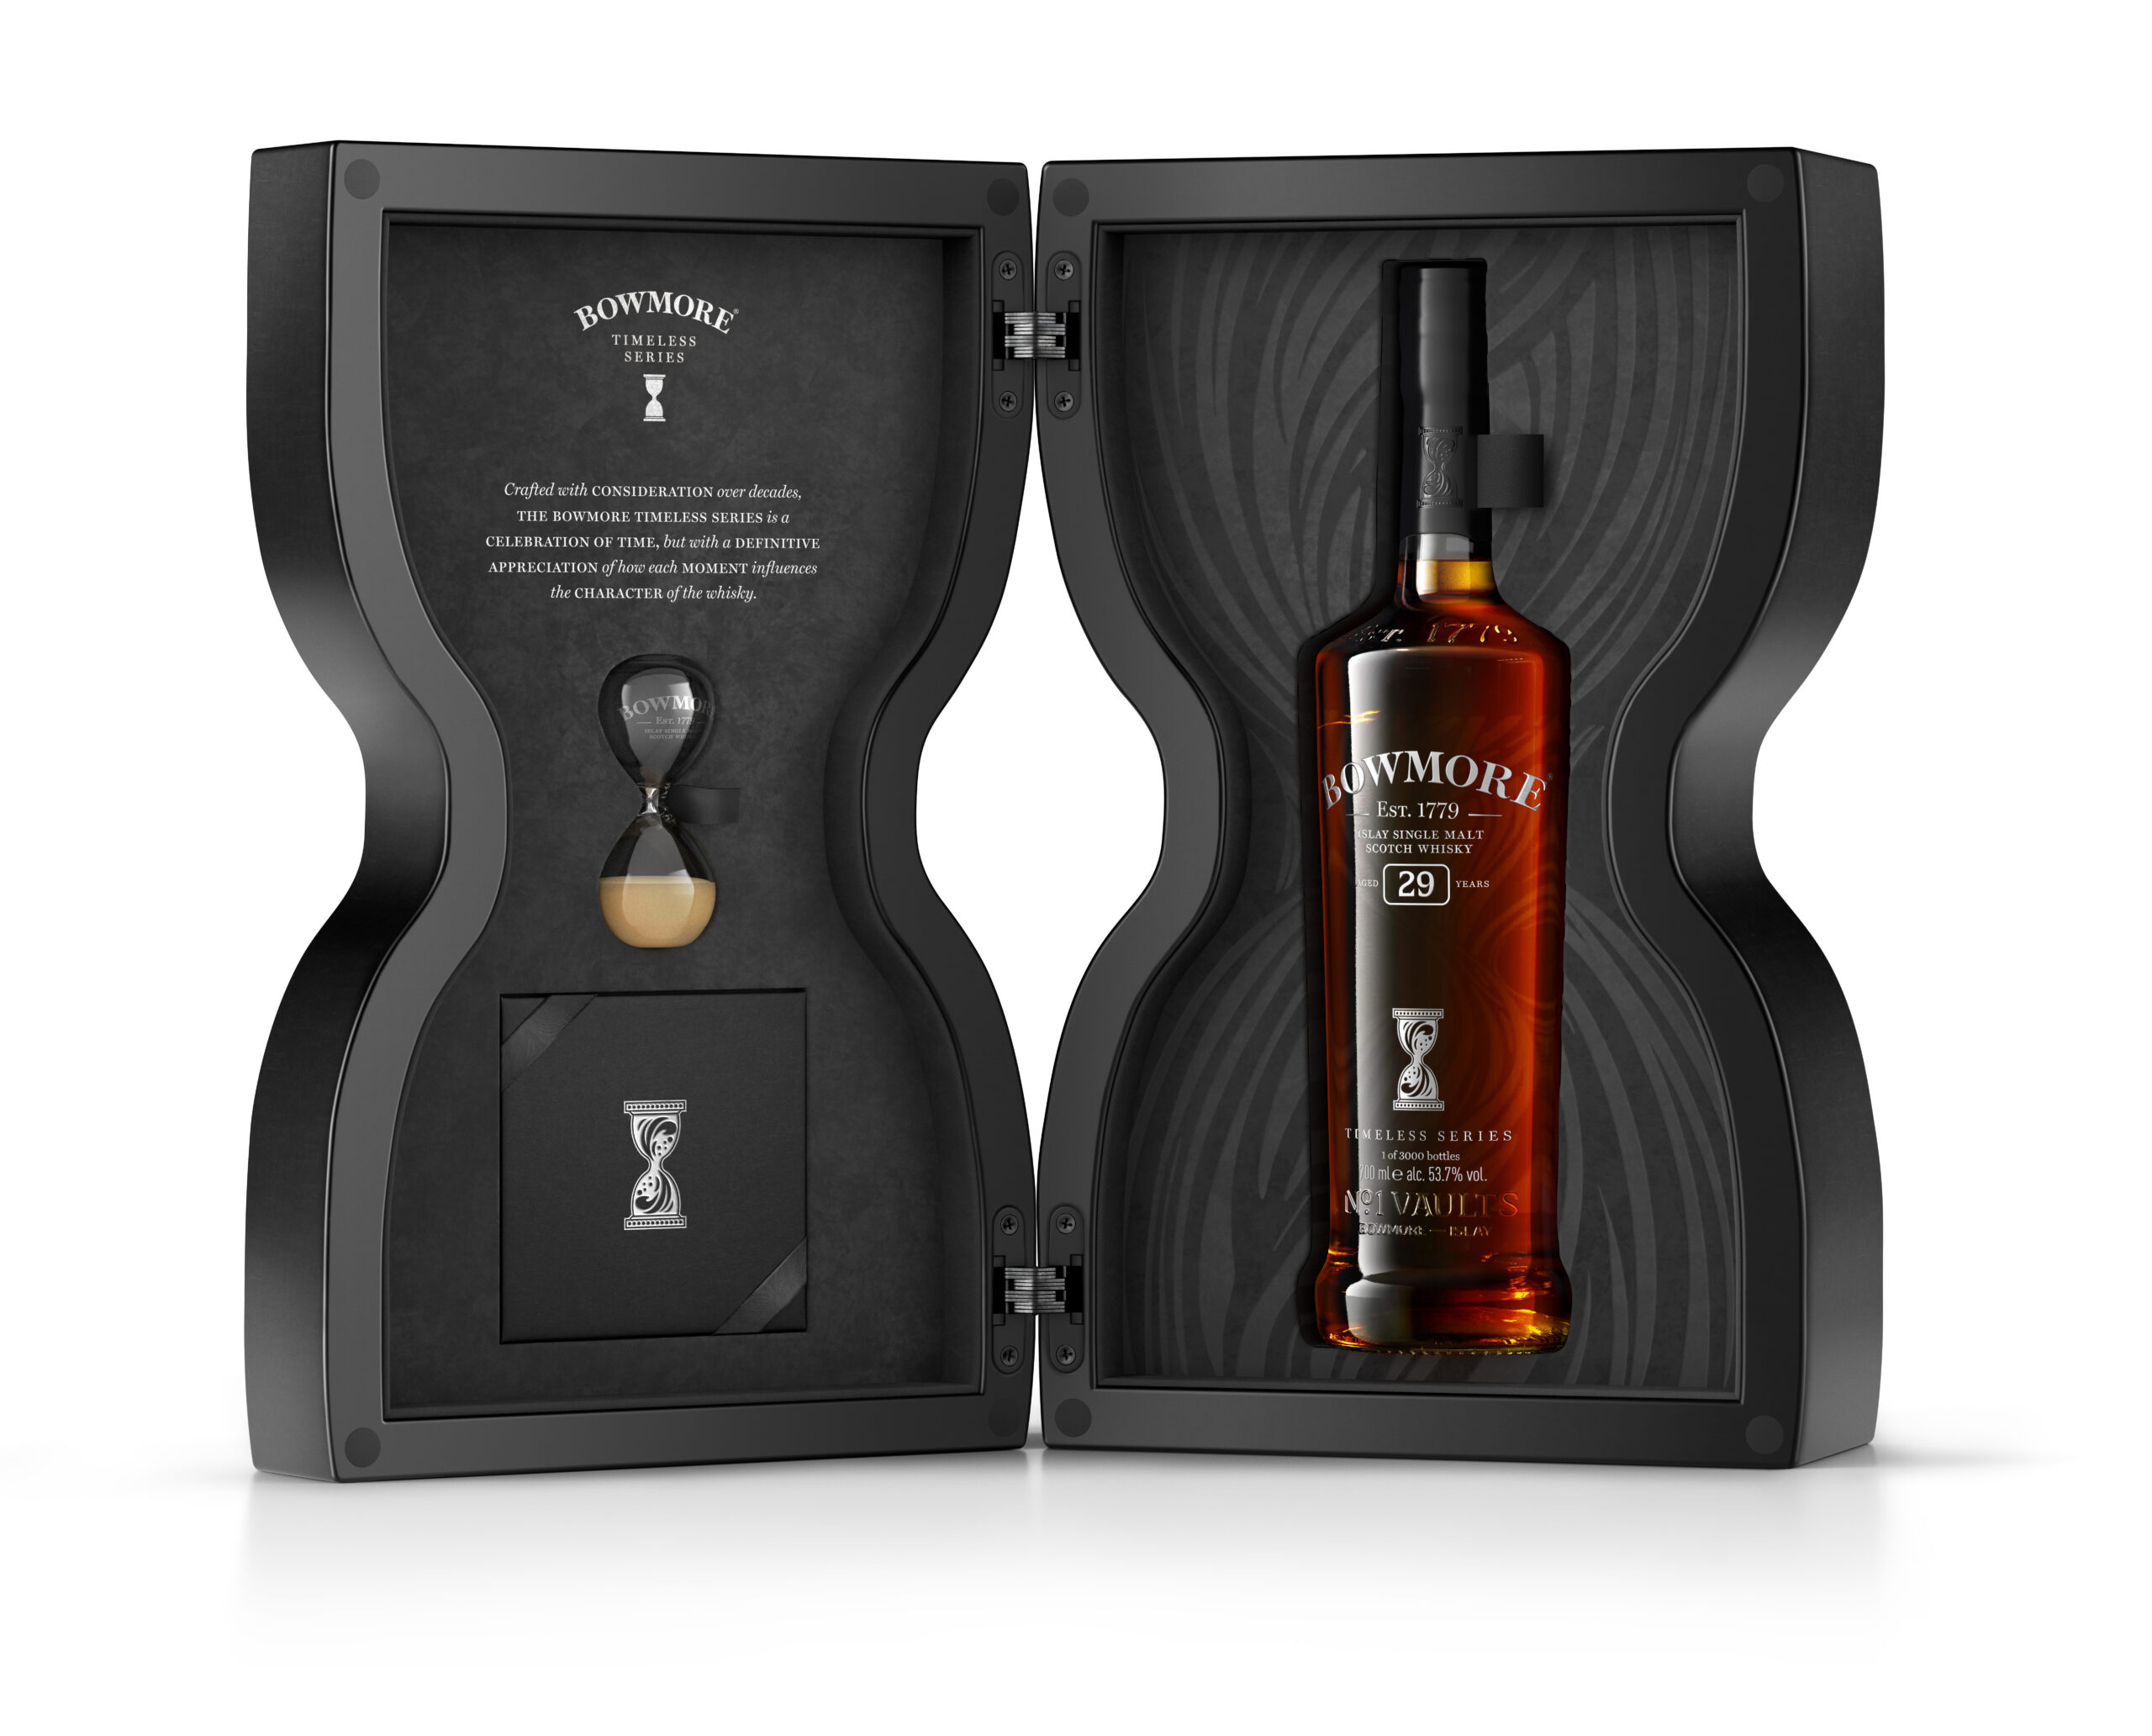 Bowmore 29 year old whisky